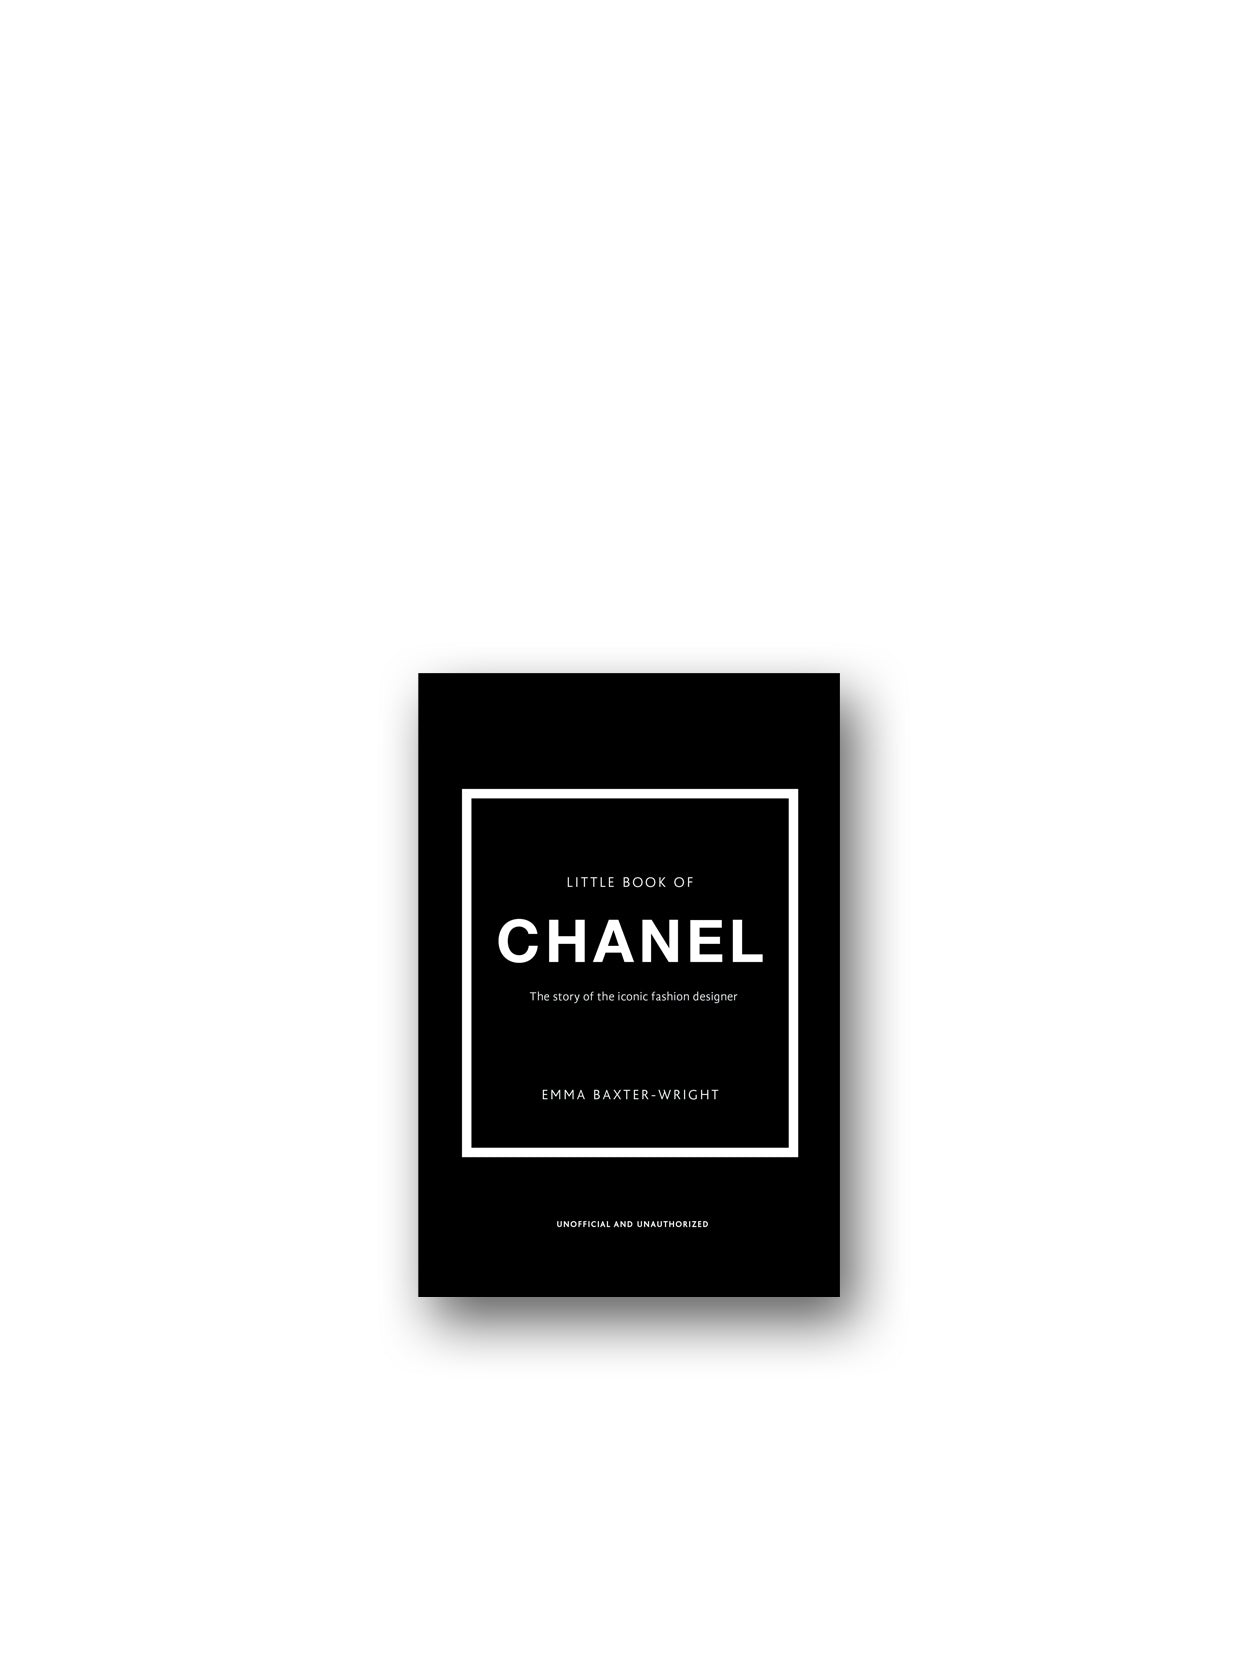 The Little Book of Chanel by Emma Baxter-Wright, Hardcover